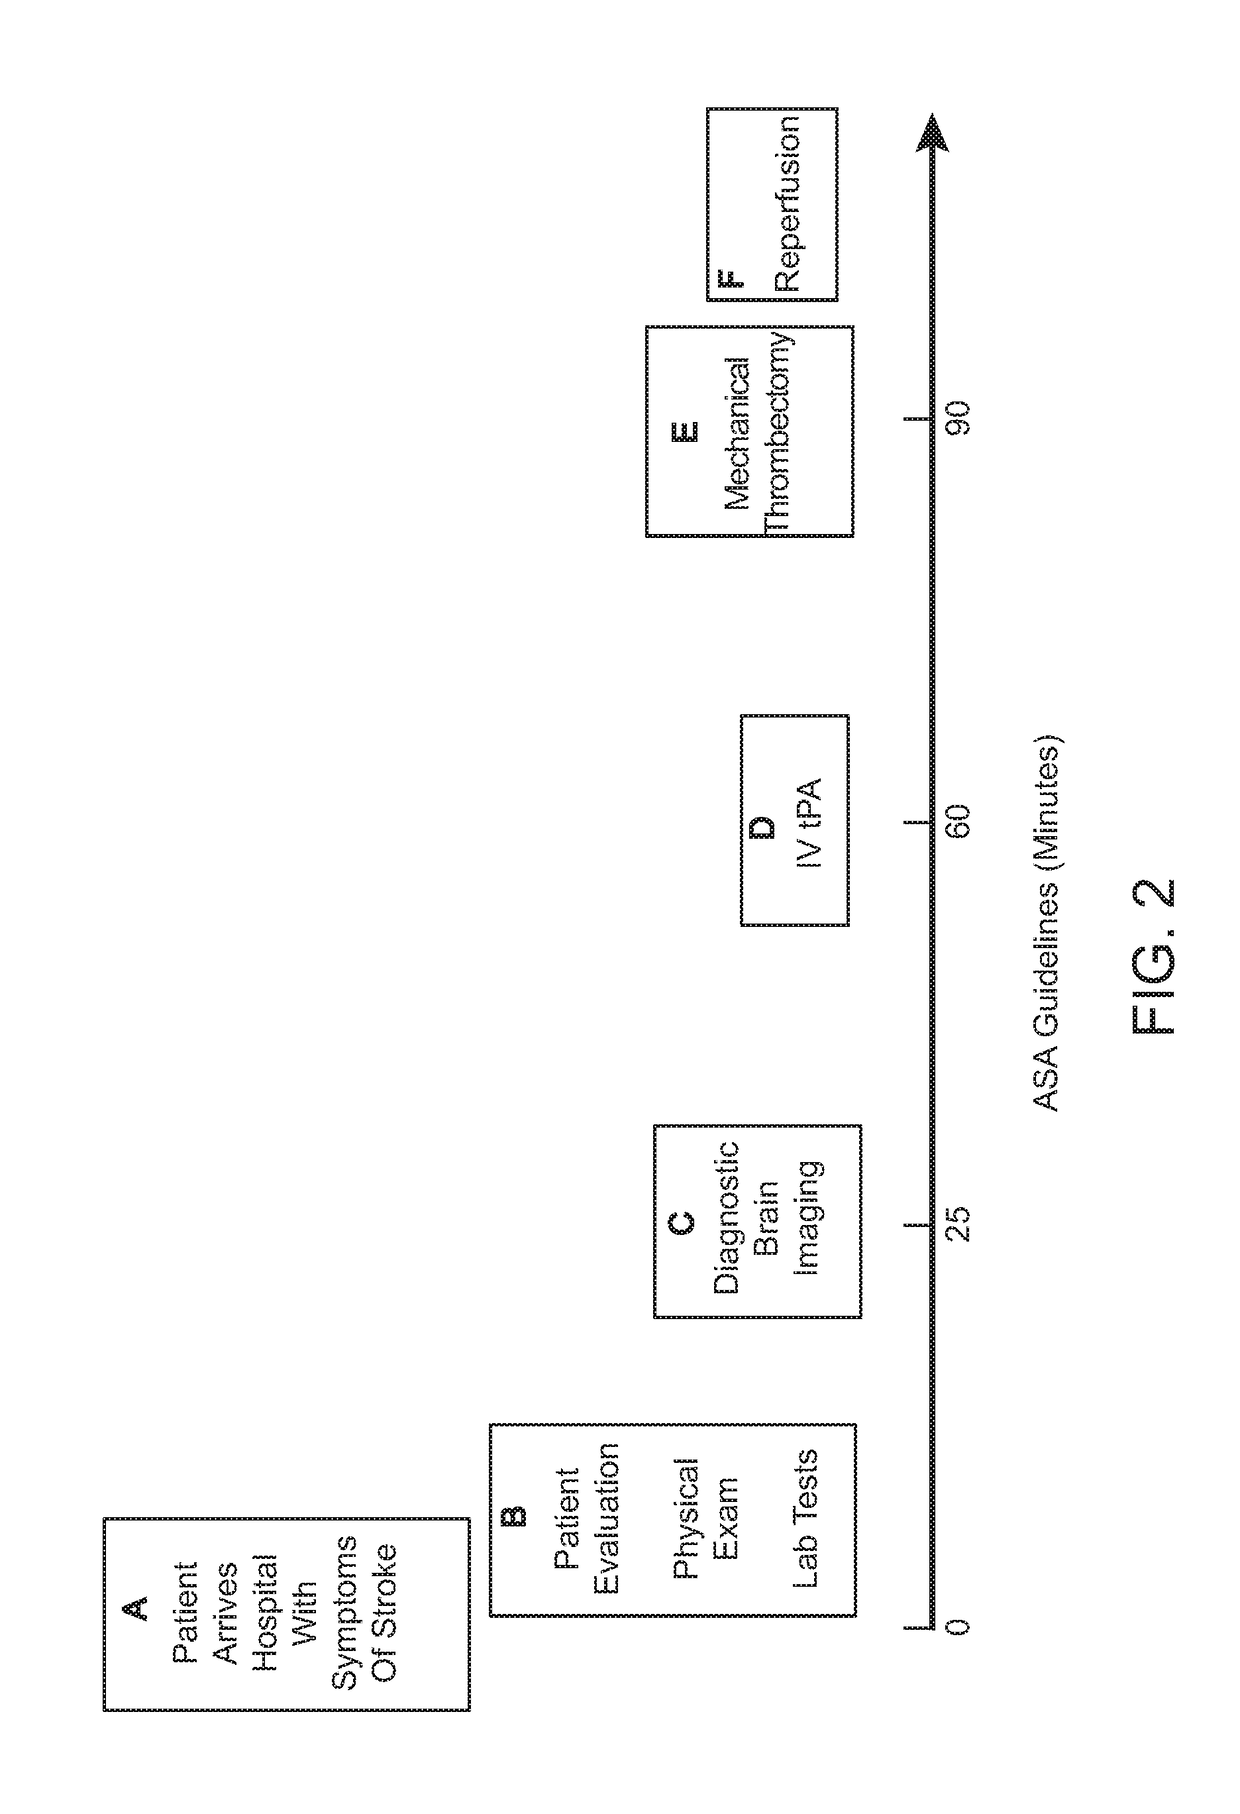 Systems and methods for treatment of stroke